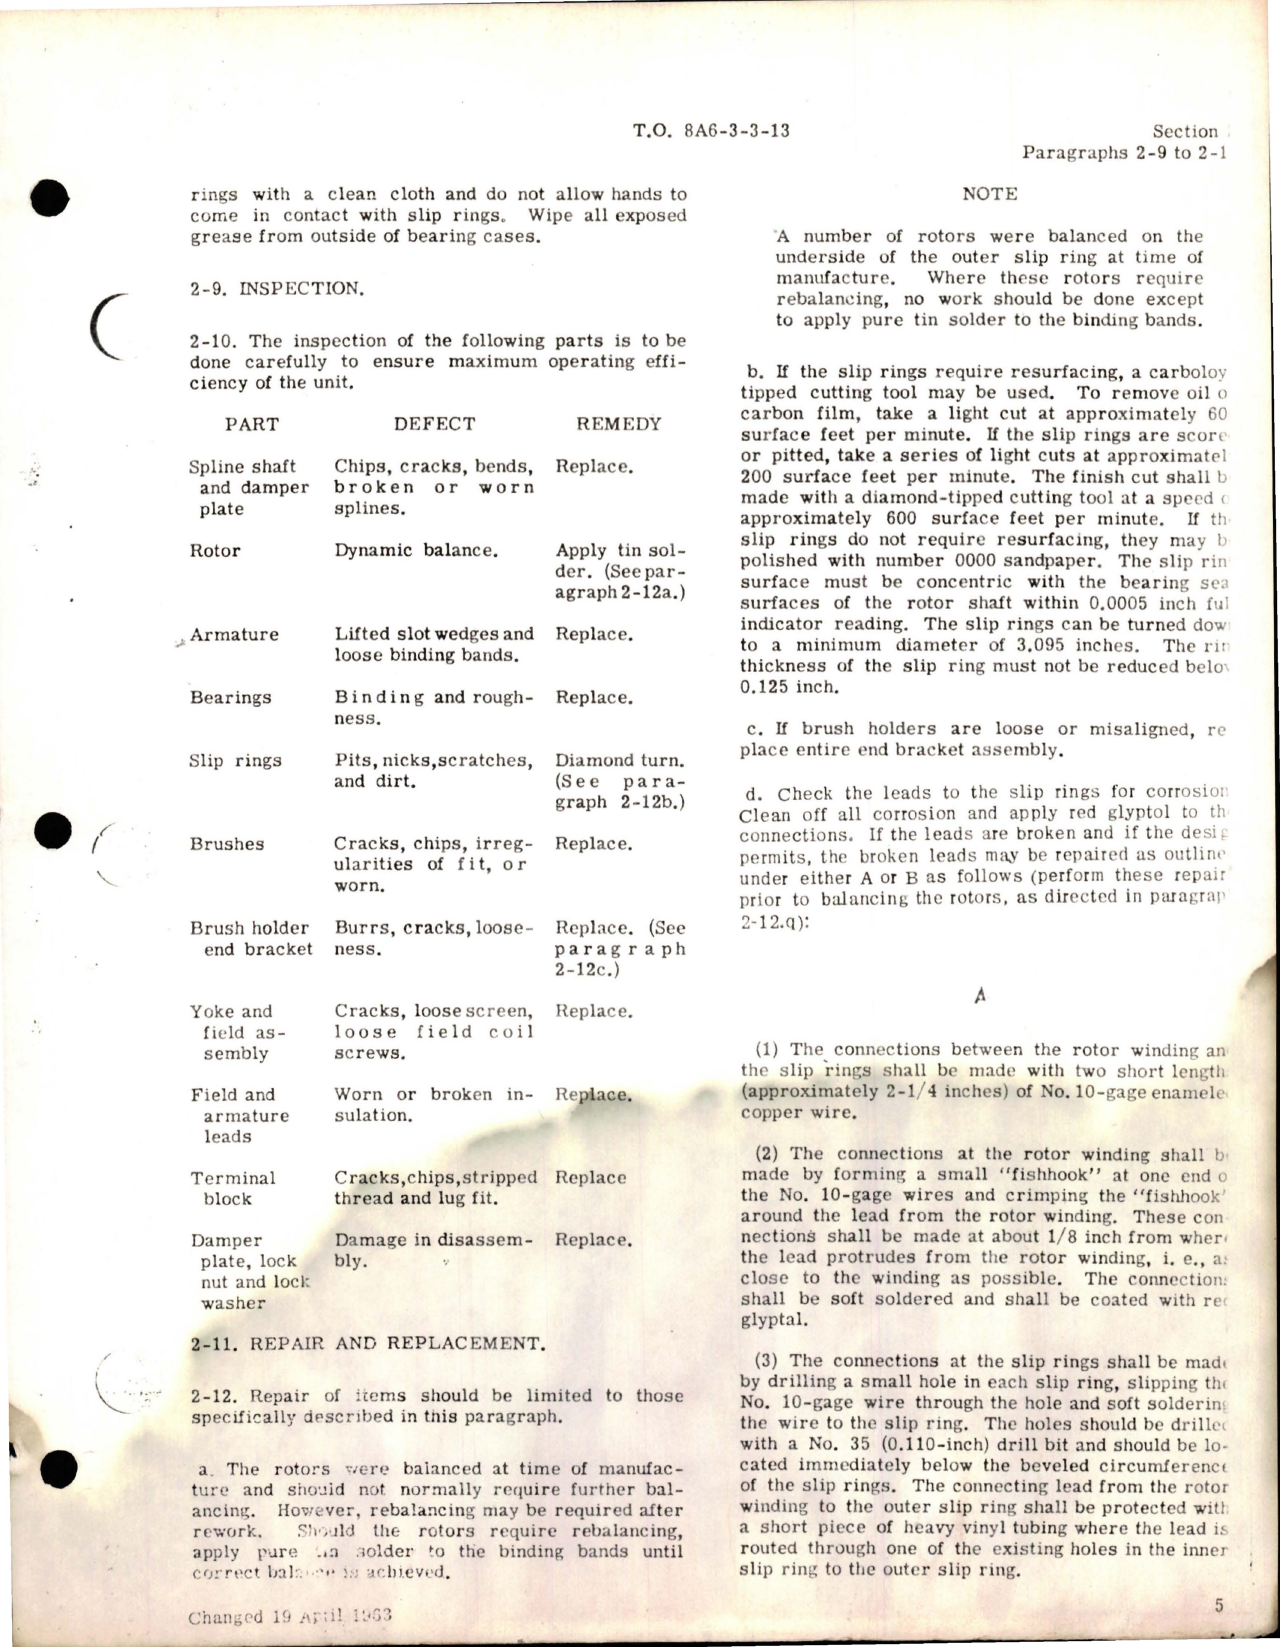 Sample page 7 from AirCorps Library document: Overhaul for Alternator - Type B-1 - Models 1-AB1-115S-4 and 1-AB1-115S-4A